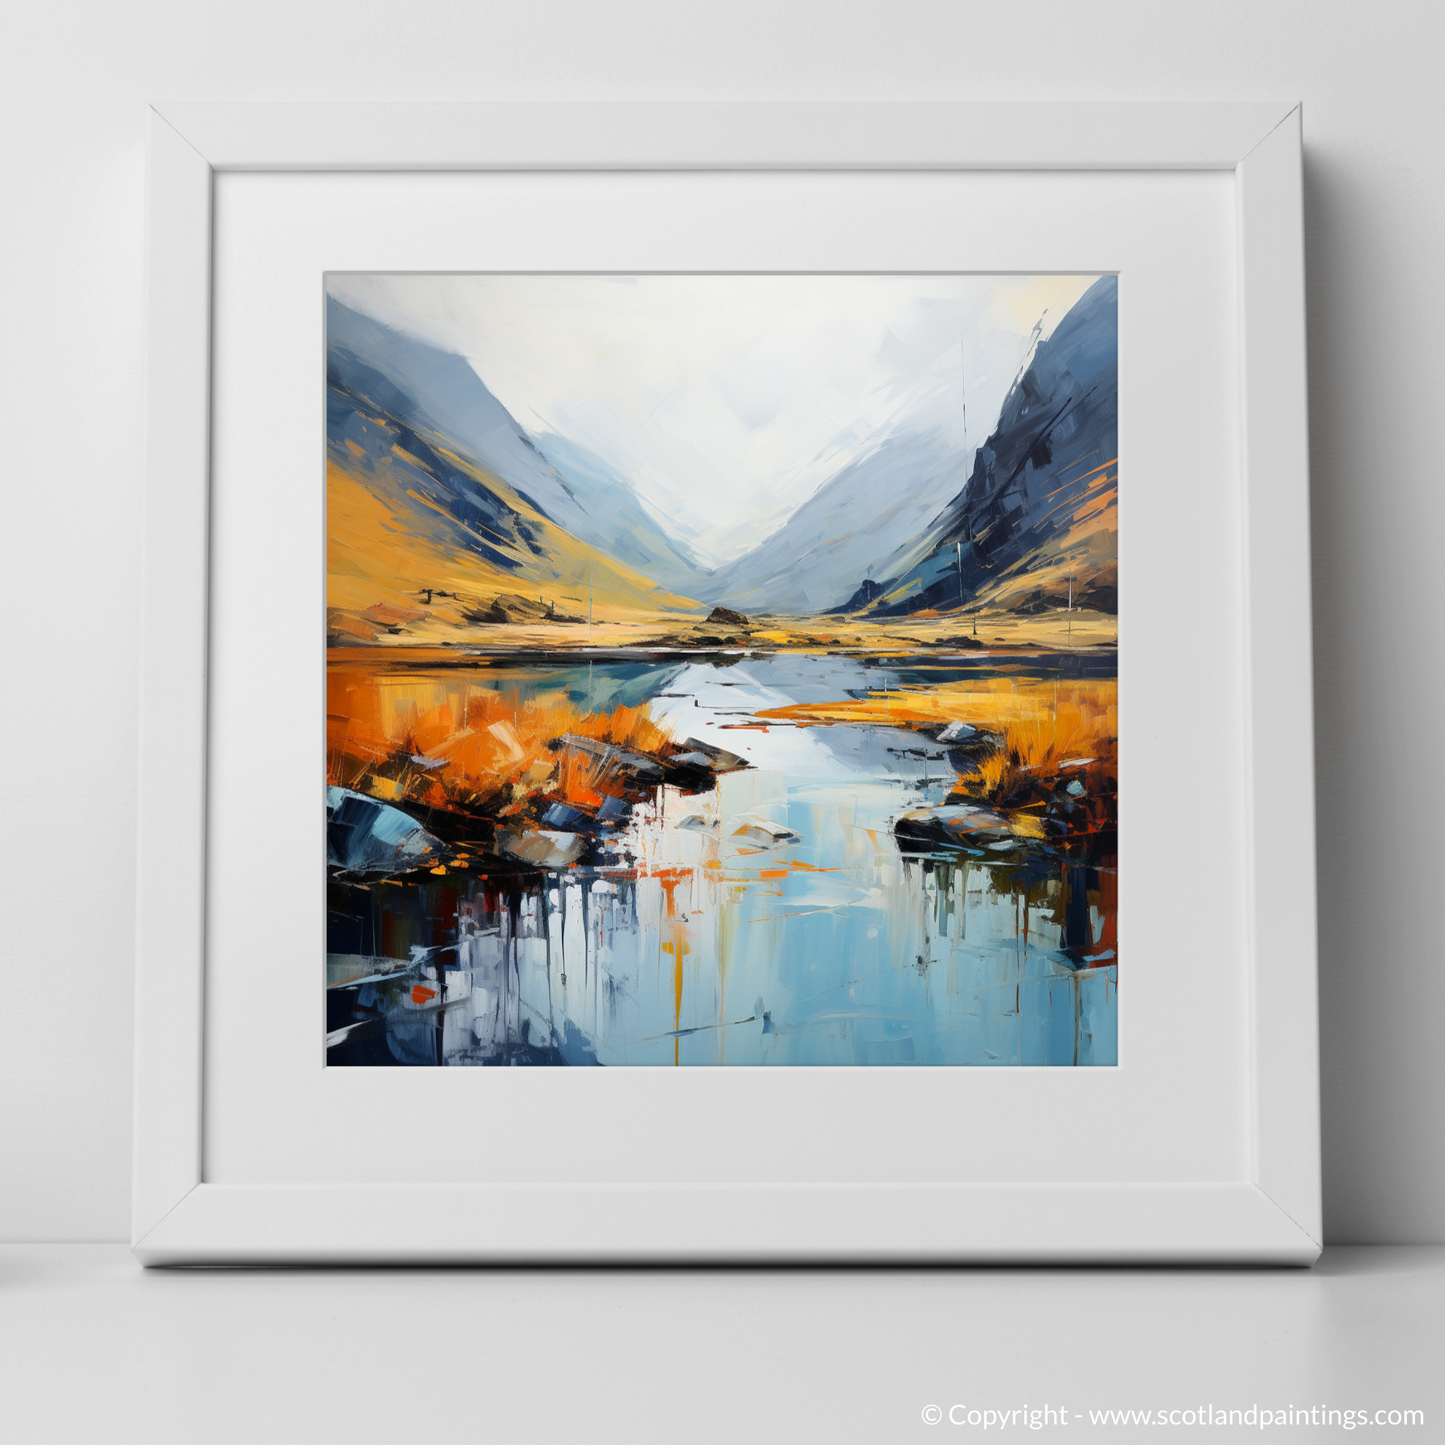 Highland Reverie: An Abstract Ode to Glen Coe